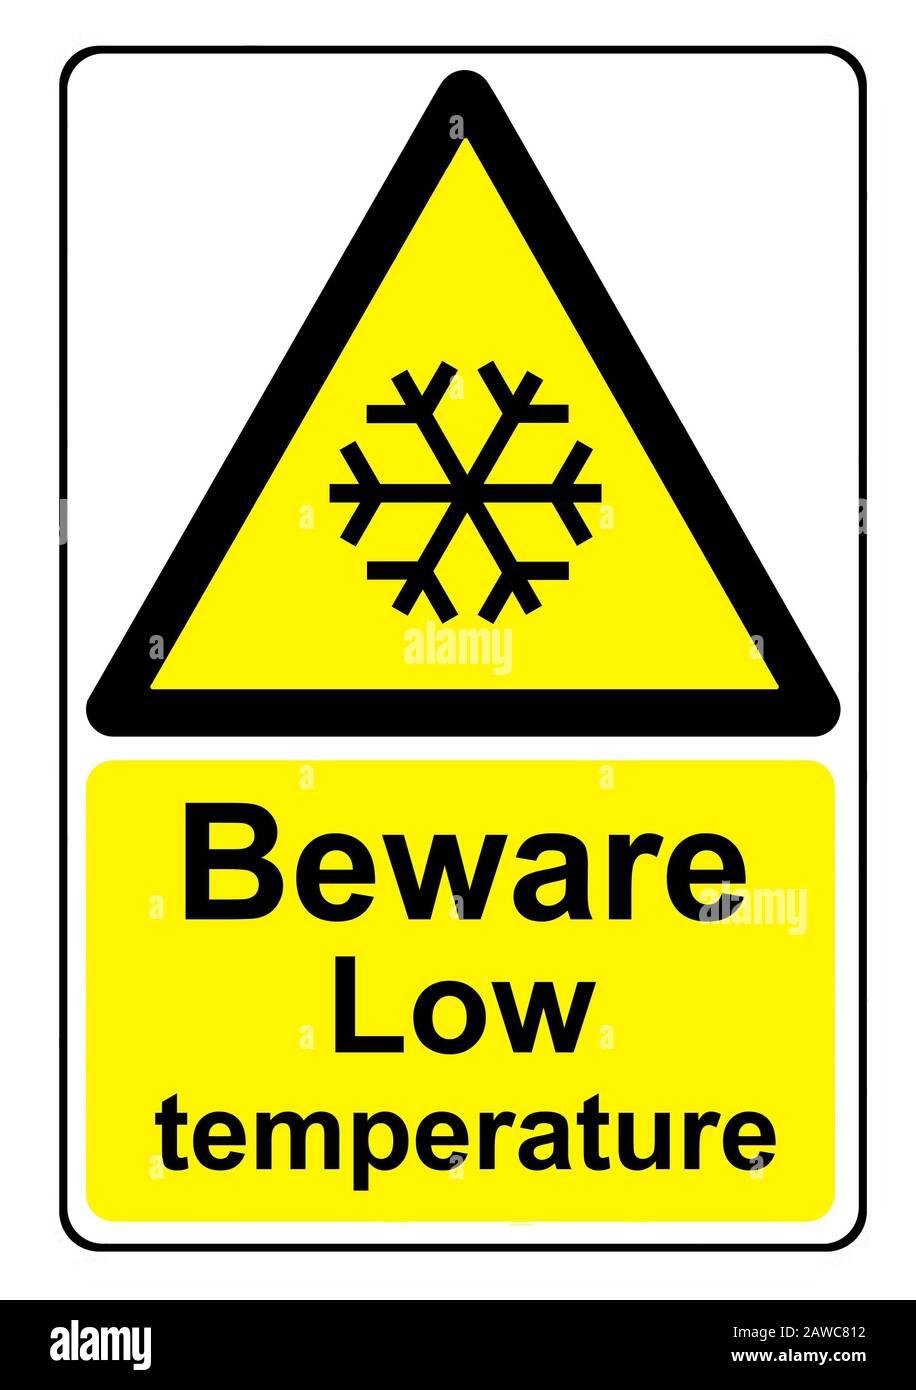 Beware low temperature in this area road warning sign Stock Photo